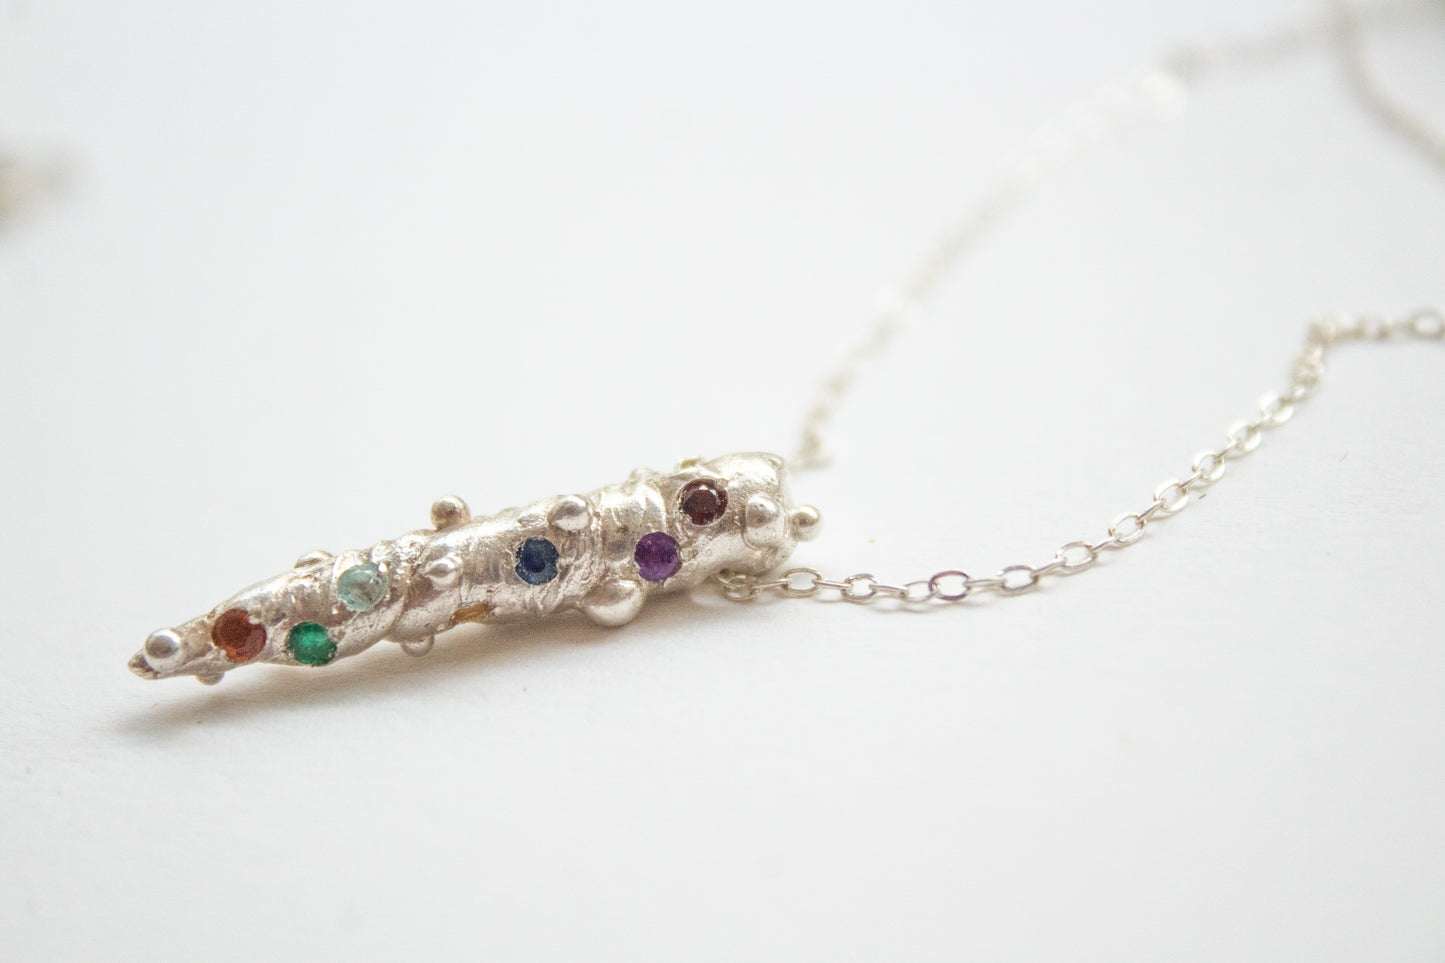 Asteria. Necklace with gems